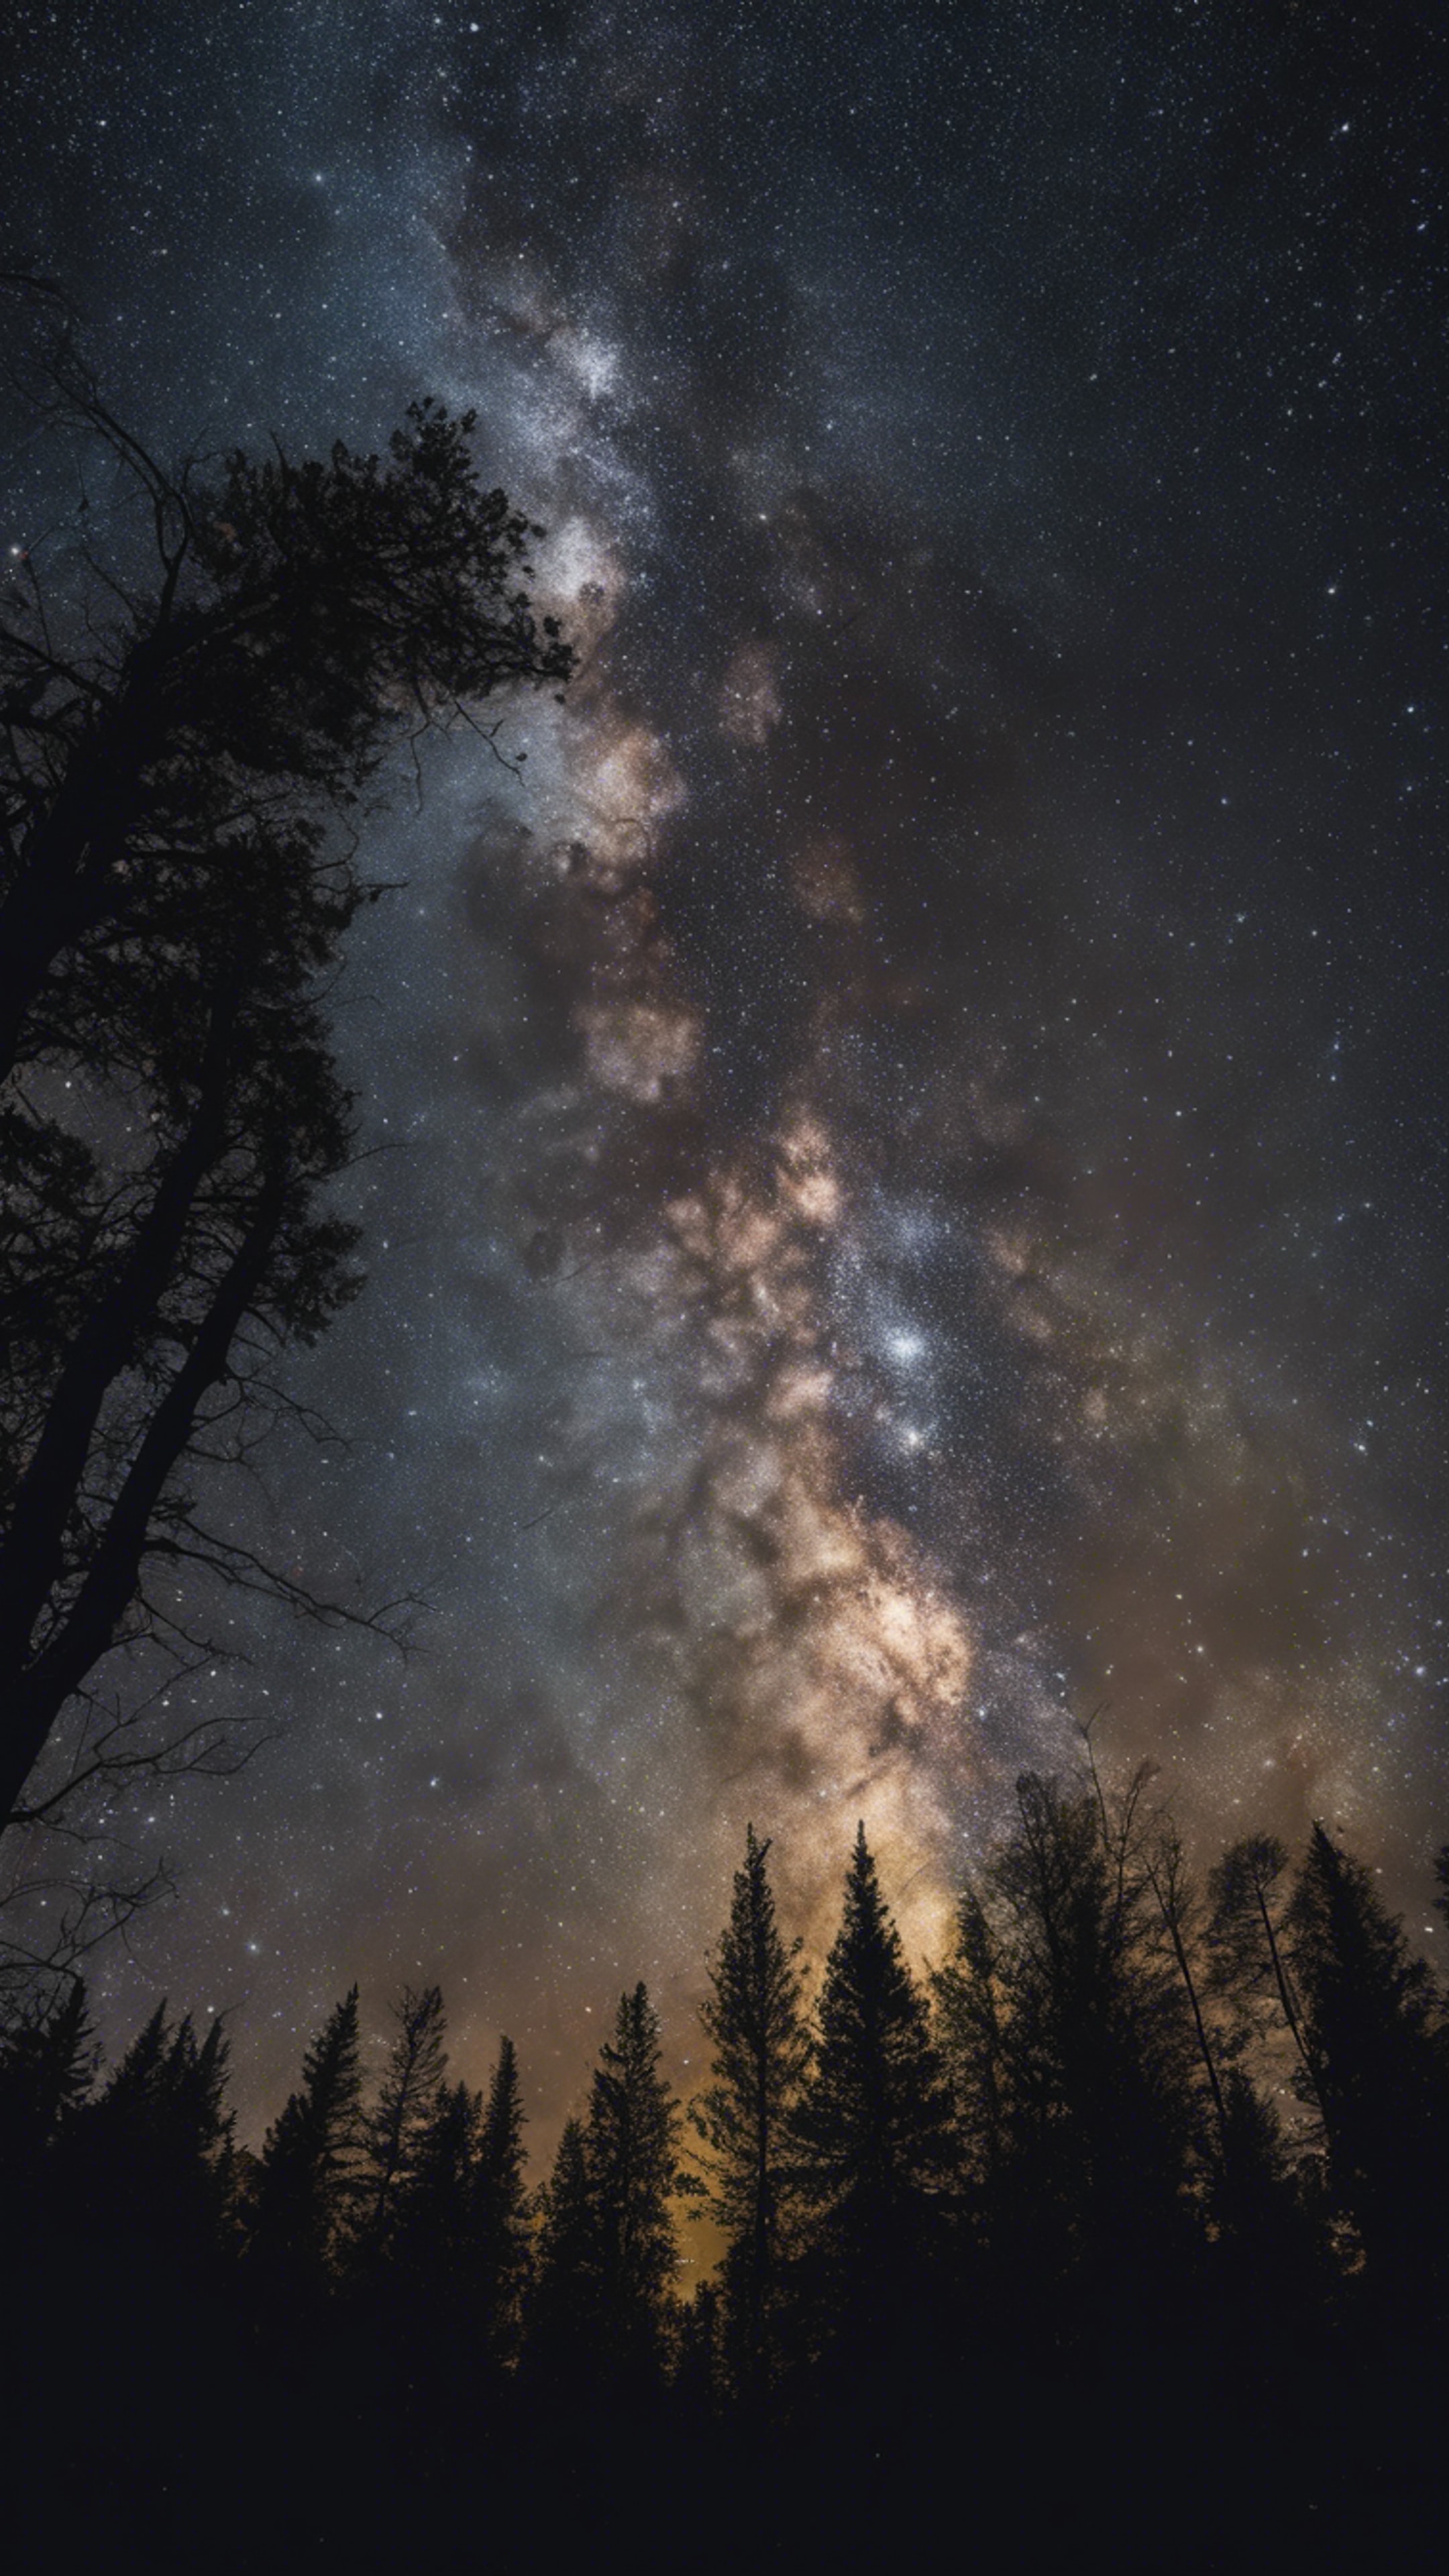 An astrophotograph showcasing the radiant Milky Way, against the contrast of a dark forest silhouette. Tapet[89bcc876a6704e52b700]